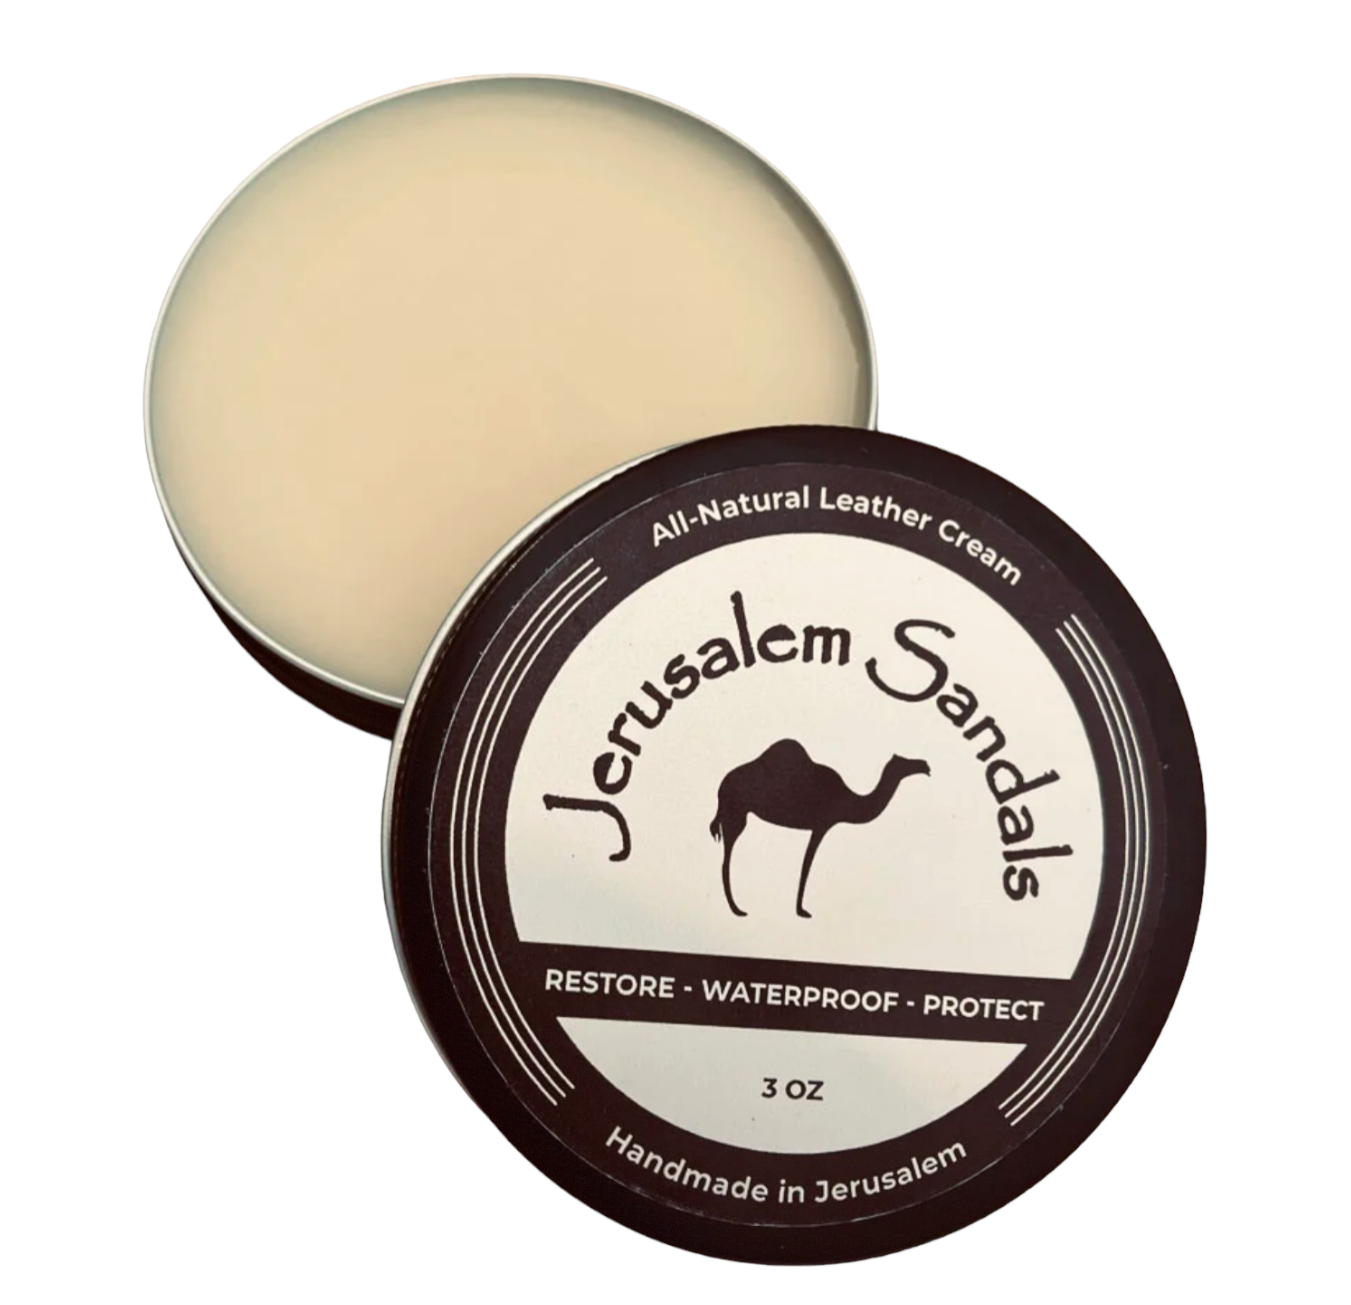 All-Natural Leather Cream and Conditioner